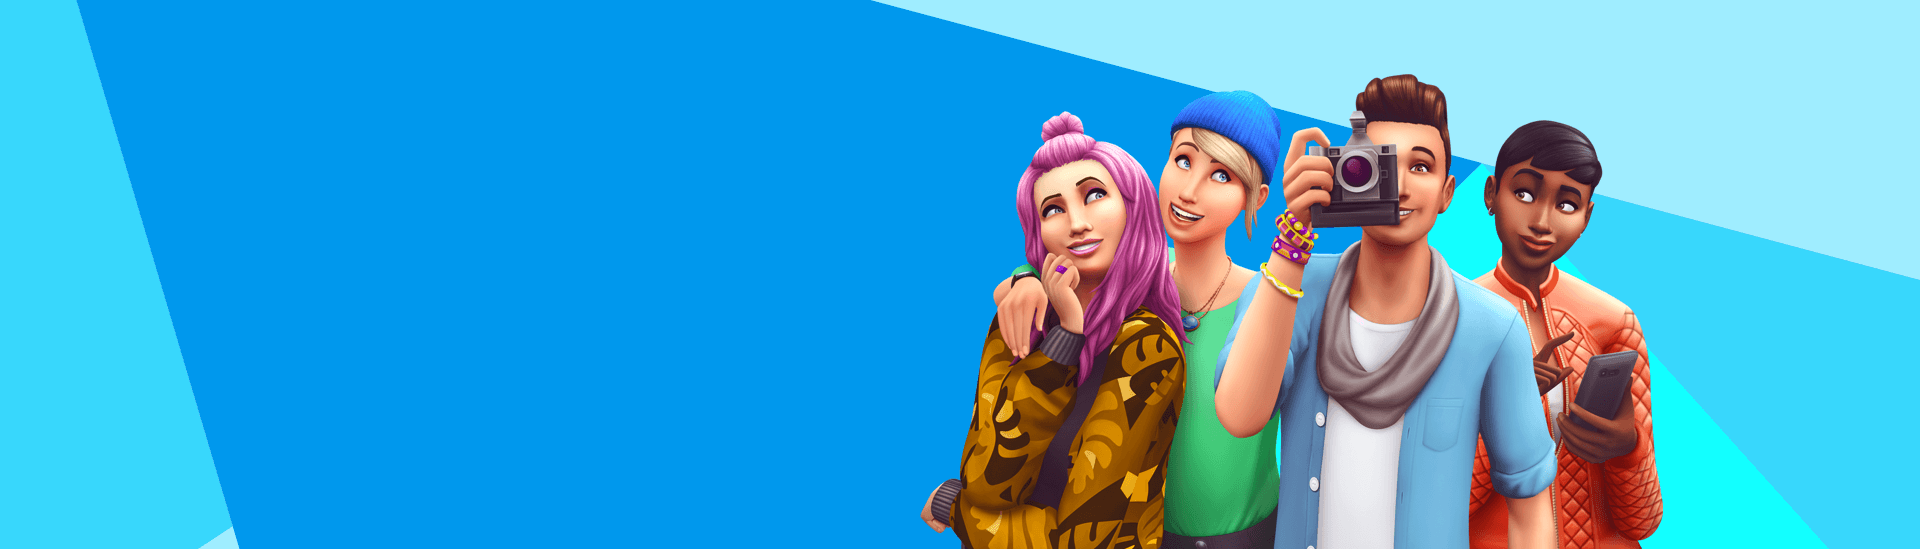 make all sims happy sims 4